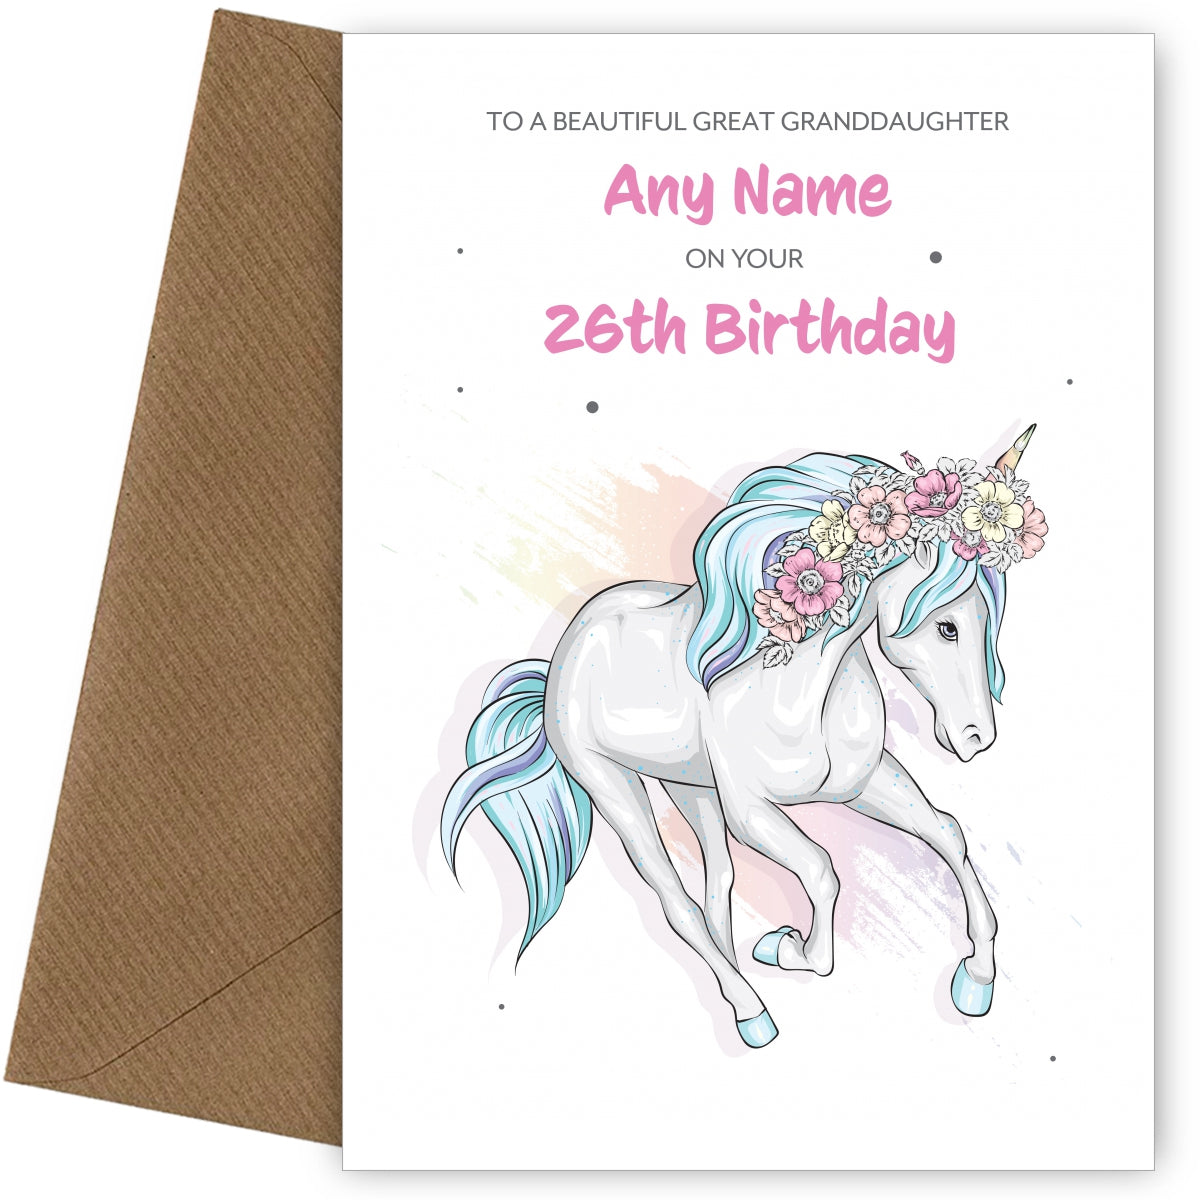 26th Birthday Card for Great Granddaughter - Beautiful Unicorn